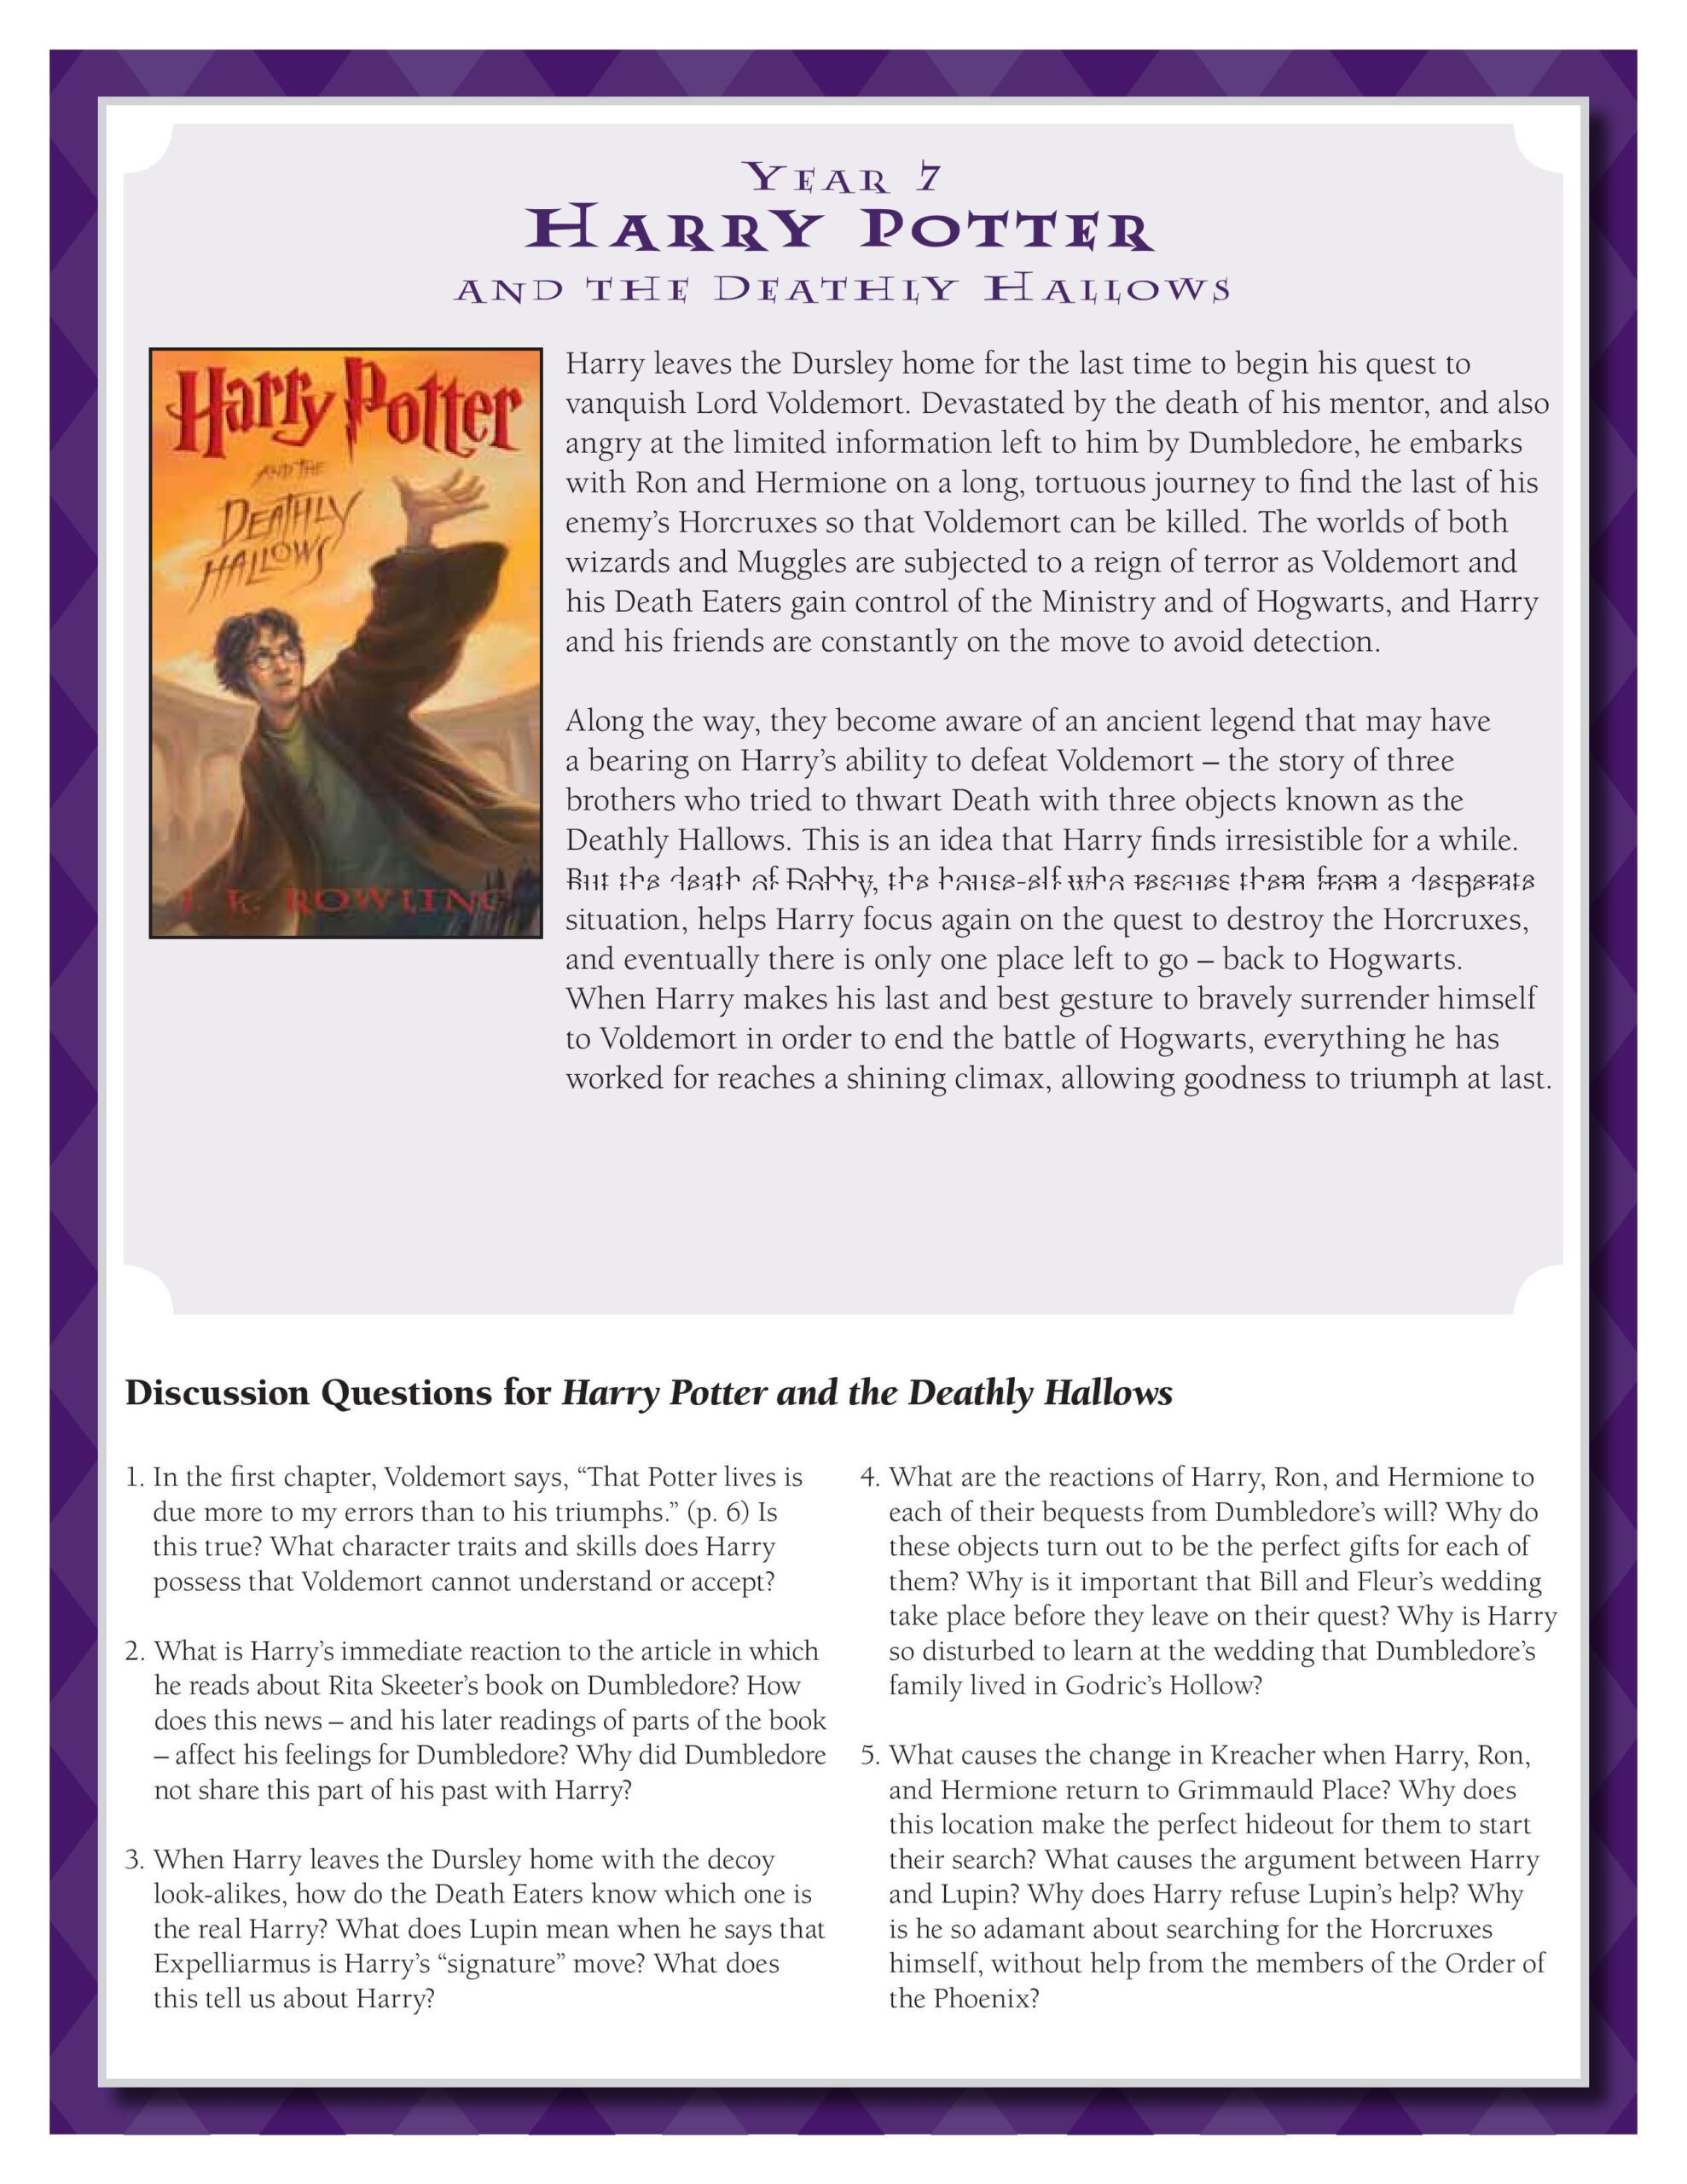 Discussion Guide For Harry Potter And The Deathly Hallows